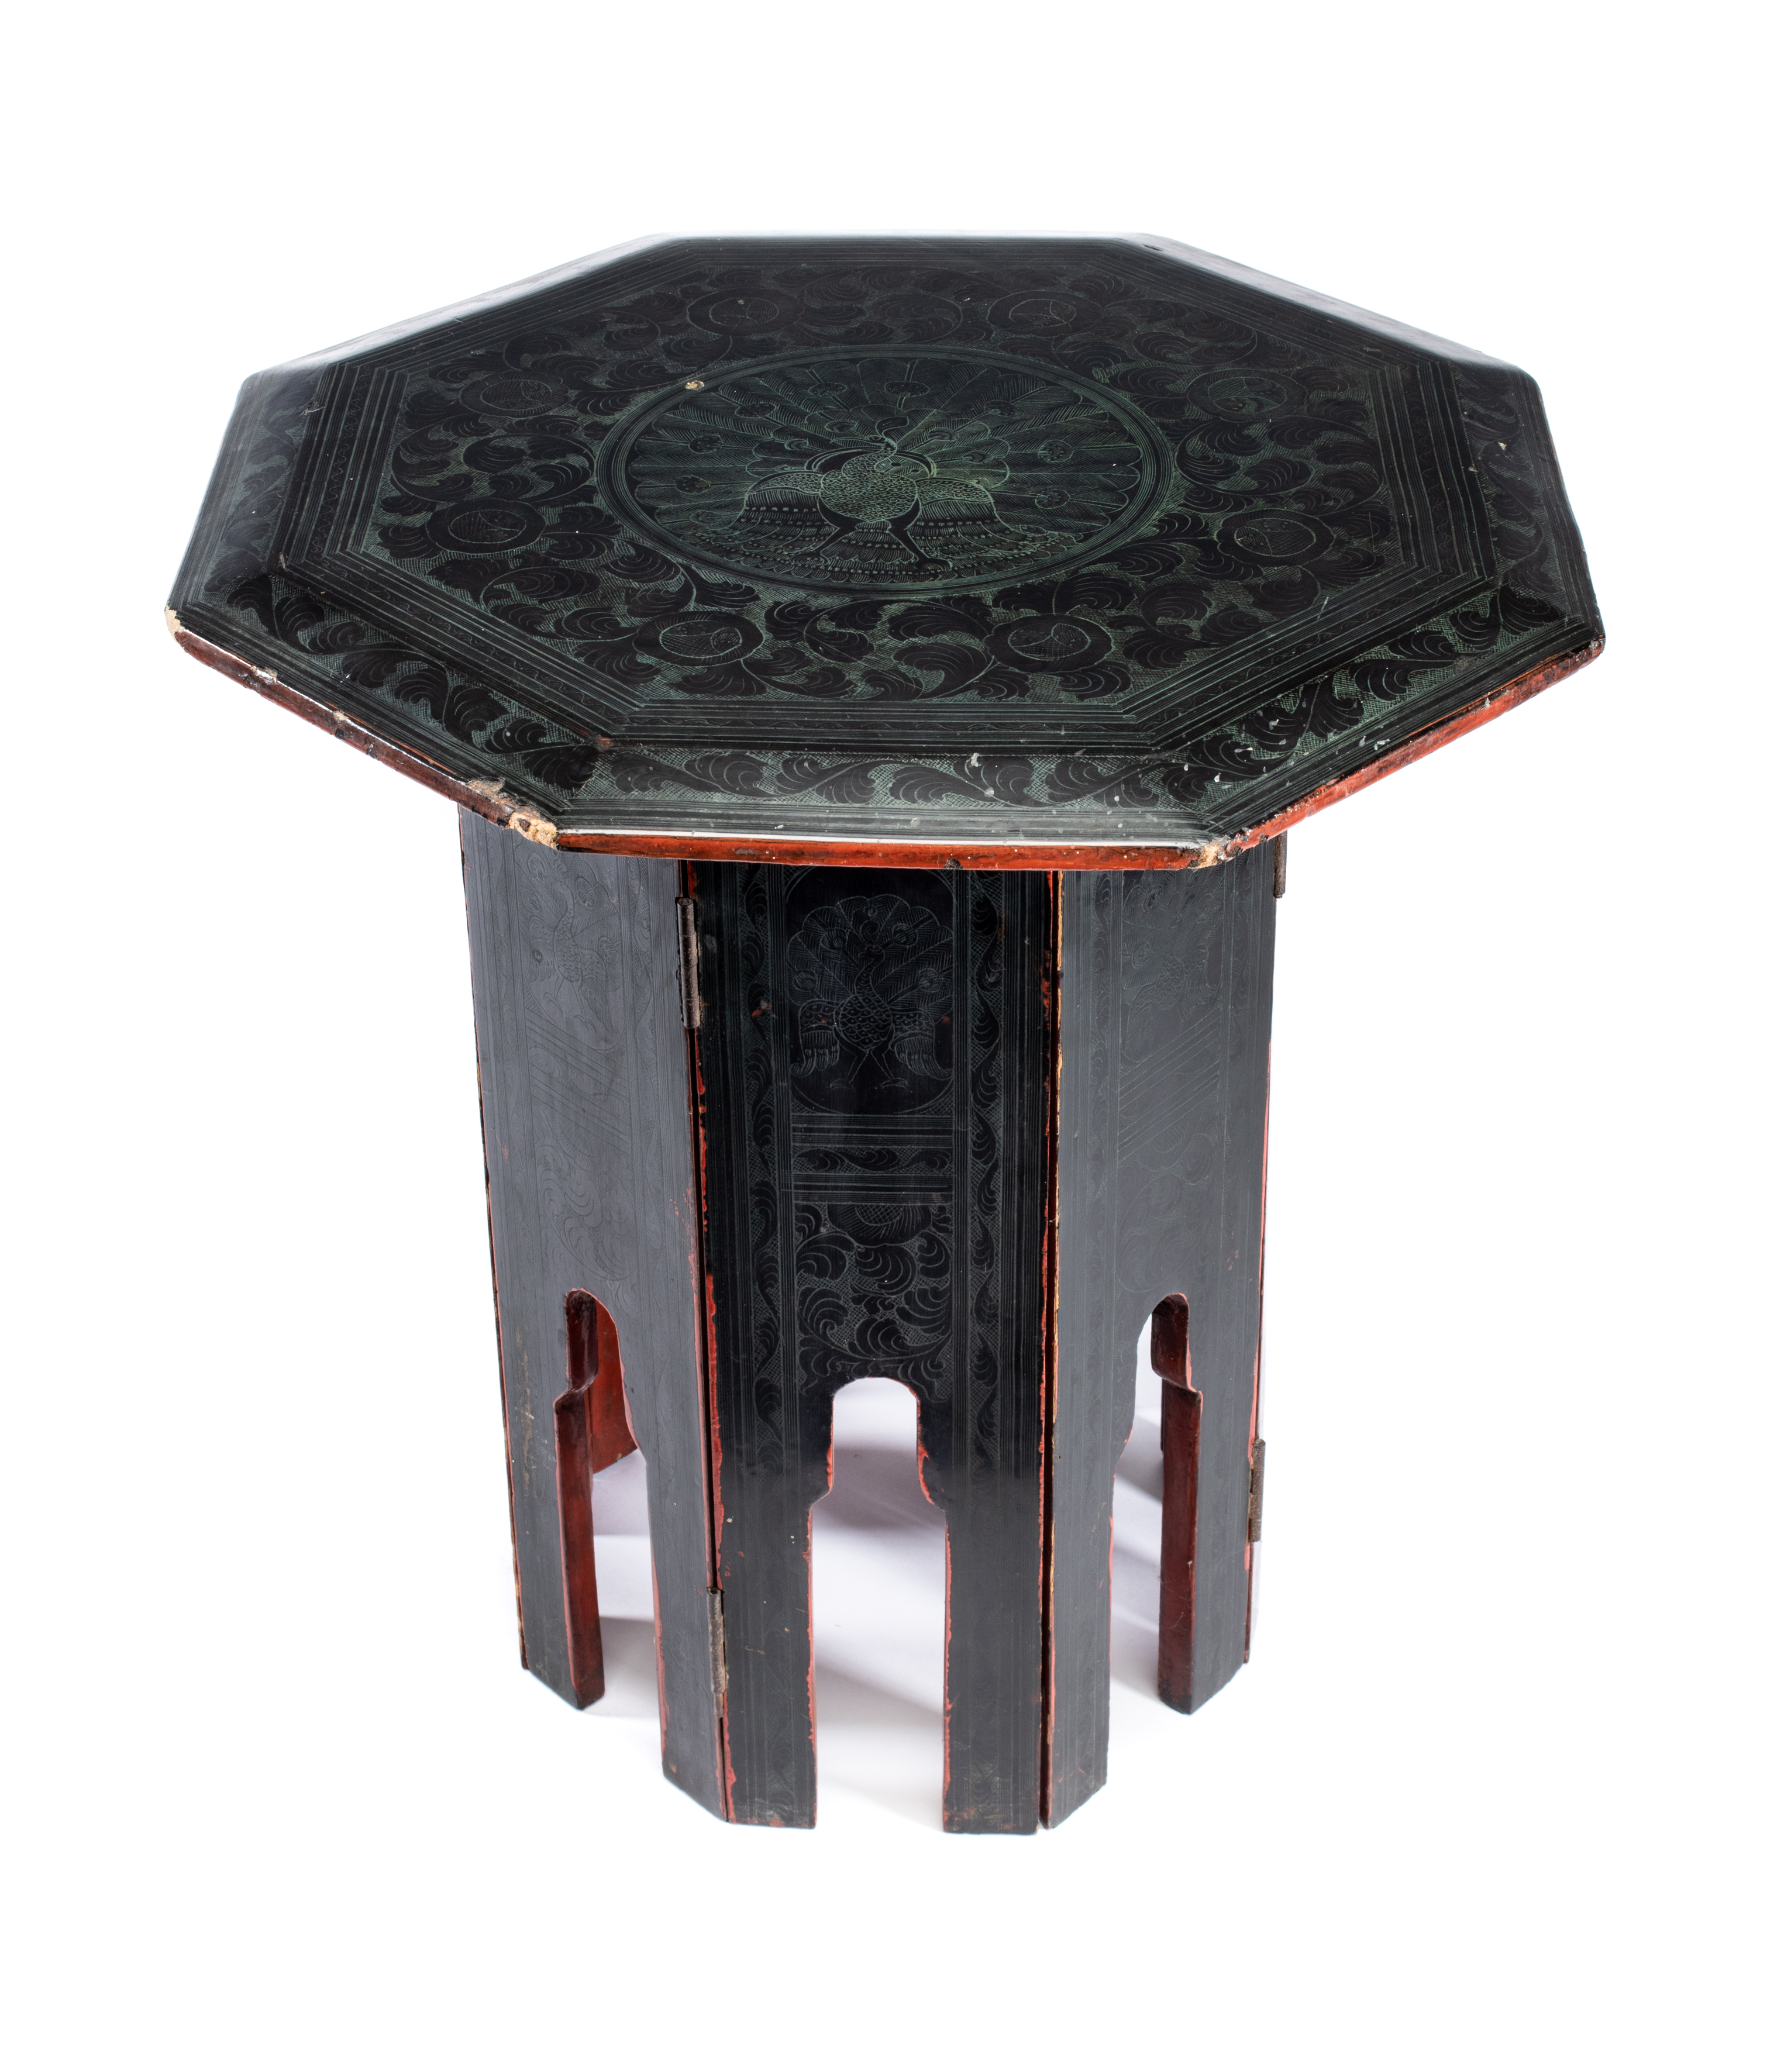 AN ANGLO-BURMESE LACQUERED WOOD SIDE TABLE, LATE 19TH CENTURY